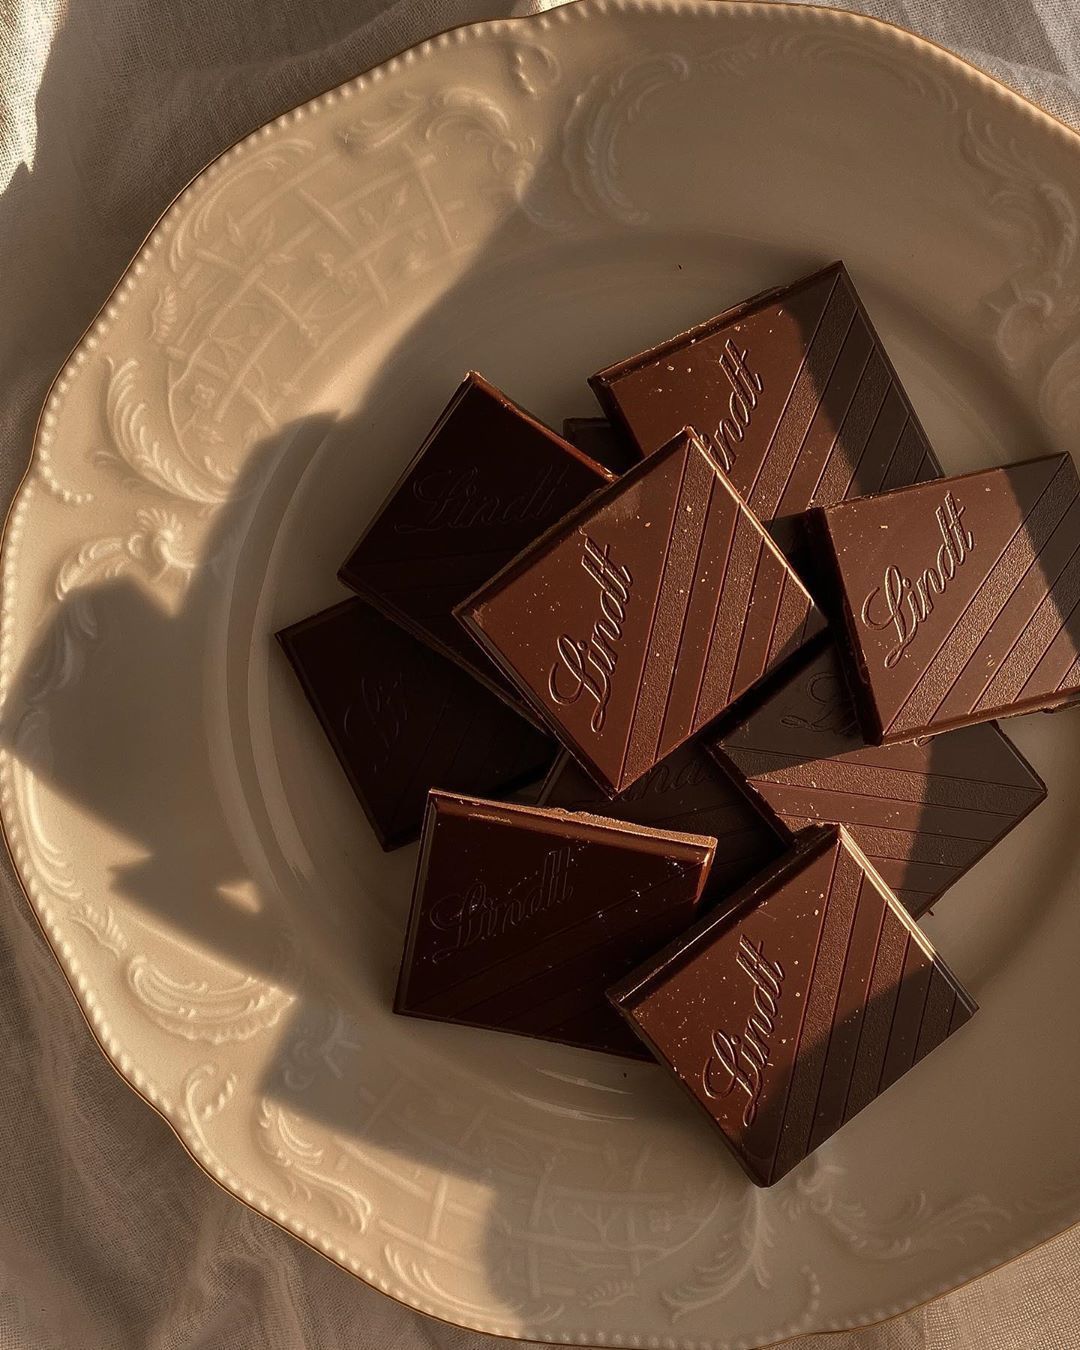 A plate of Lindt chocolate bars - Chocolate